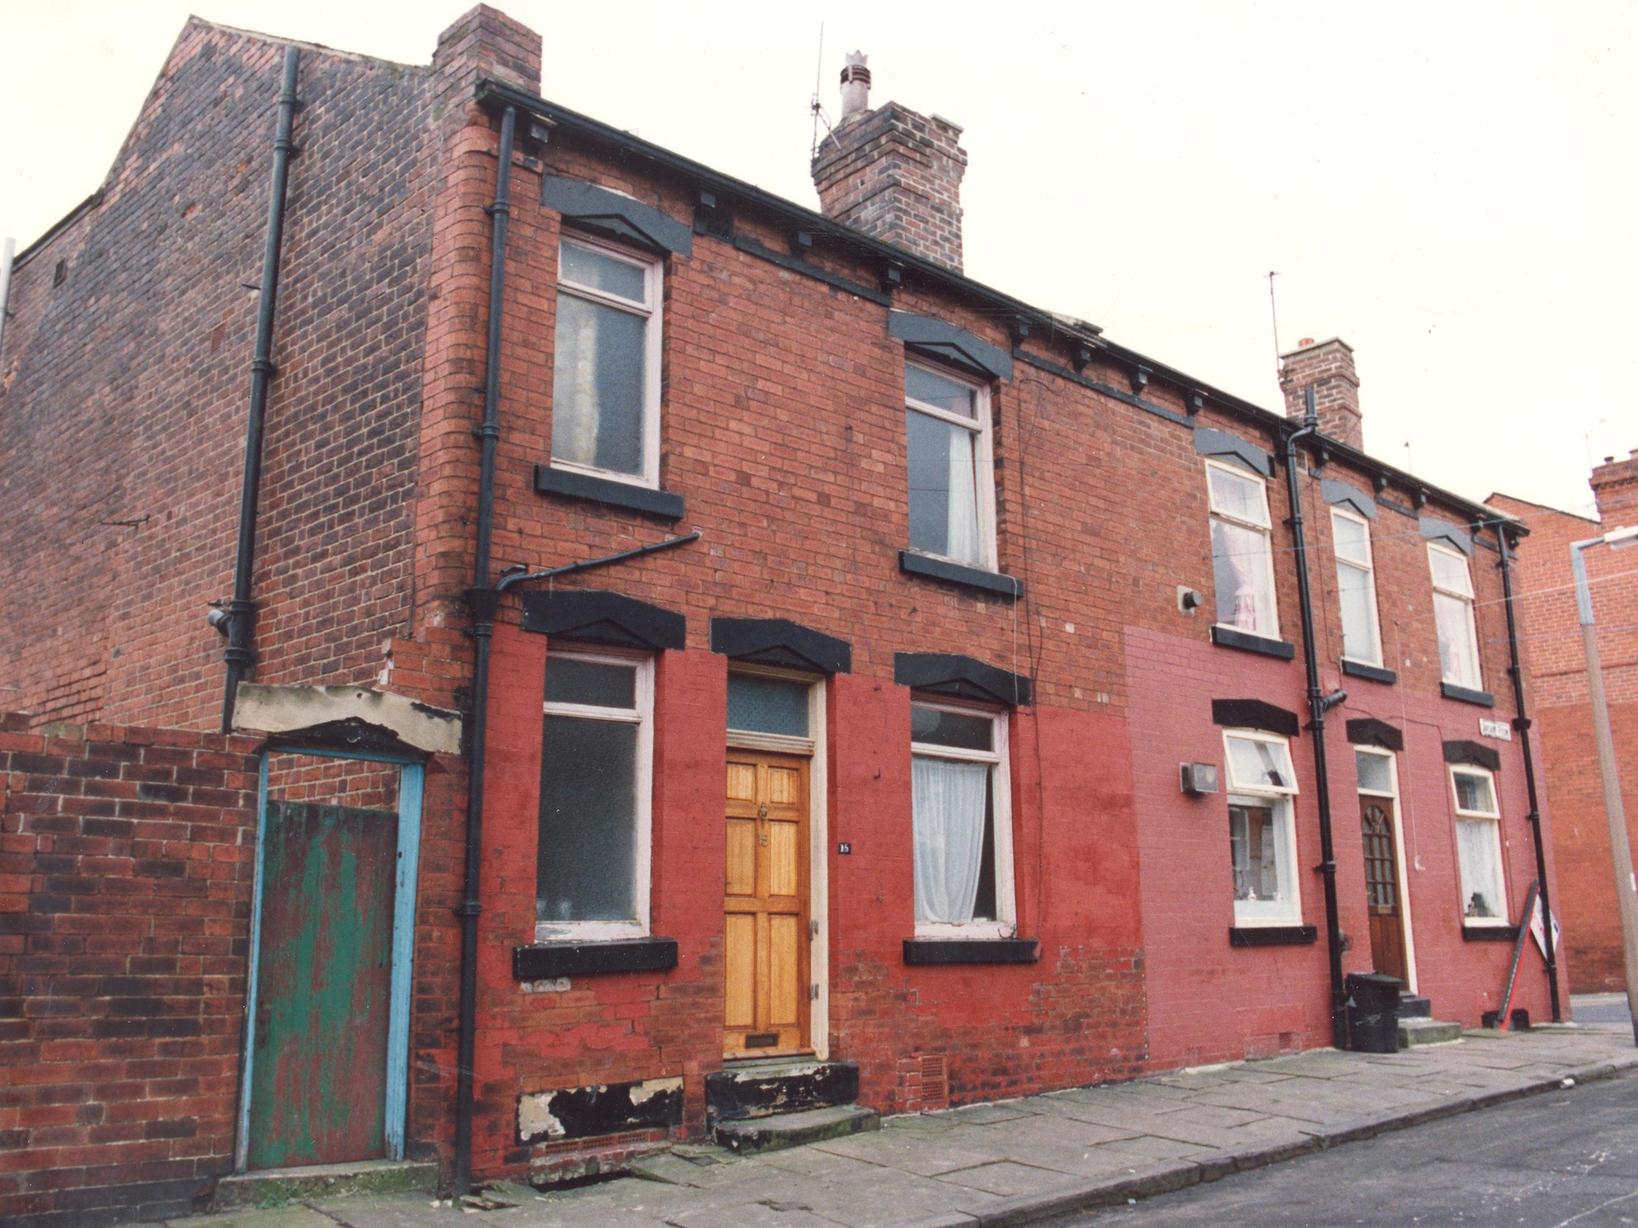 An estate agent was inundated with calls after offering the 'sale of the century' - a house on Aviary View in Armley for just over 6,000. The one bedroomed back to back was vacant after being repossesed and was in need of some TLC.